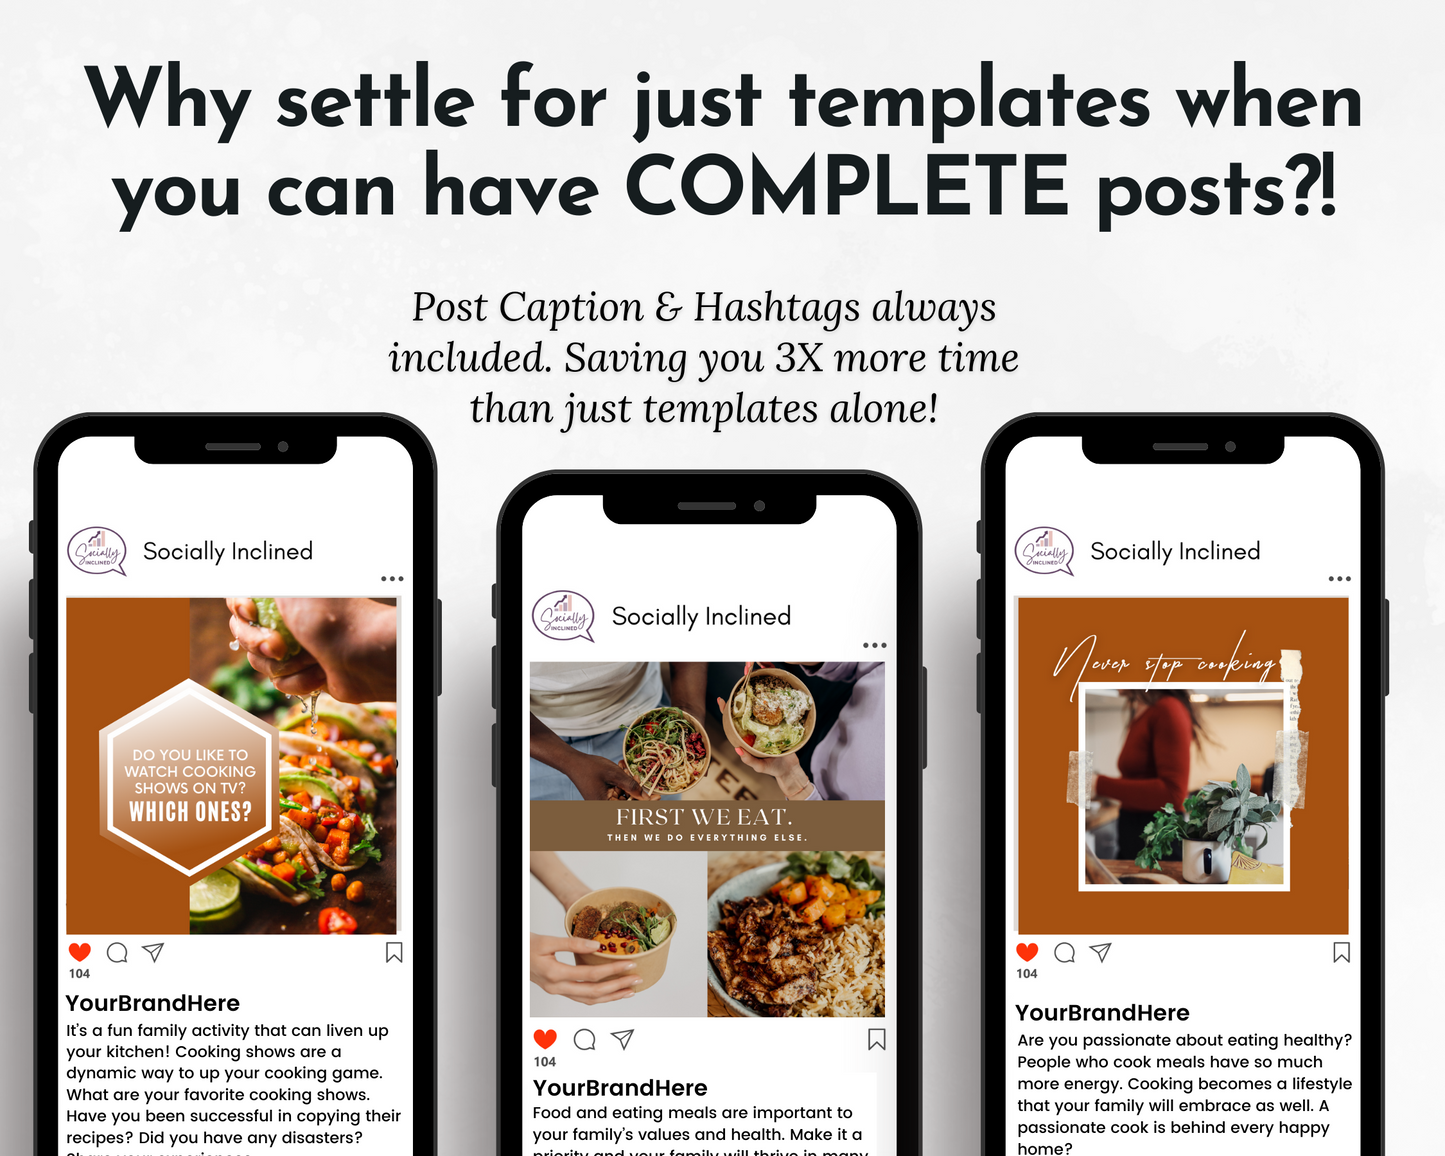 A group of Cooking Social Media Post Bundles with Canva Templates from the brand Socially Inclined, with the text "select for just templates when you have complete post" for creating social media images.